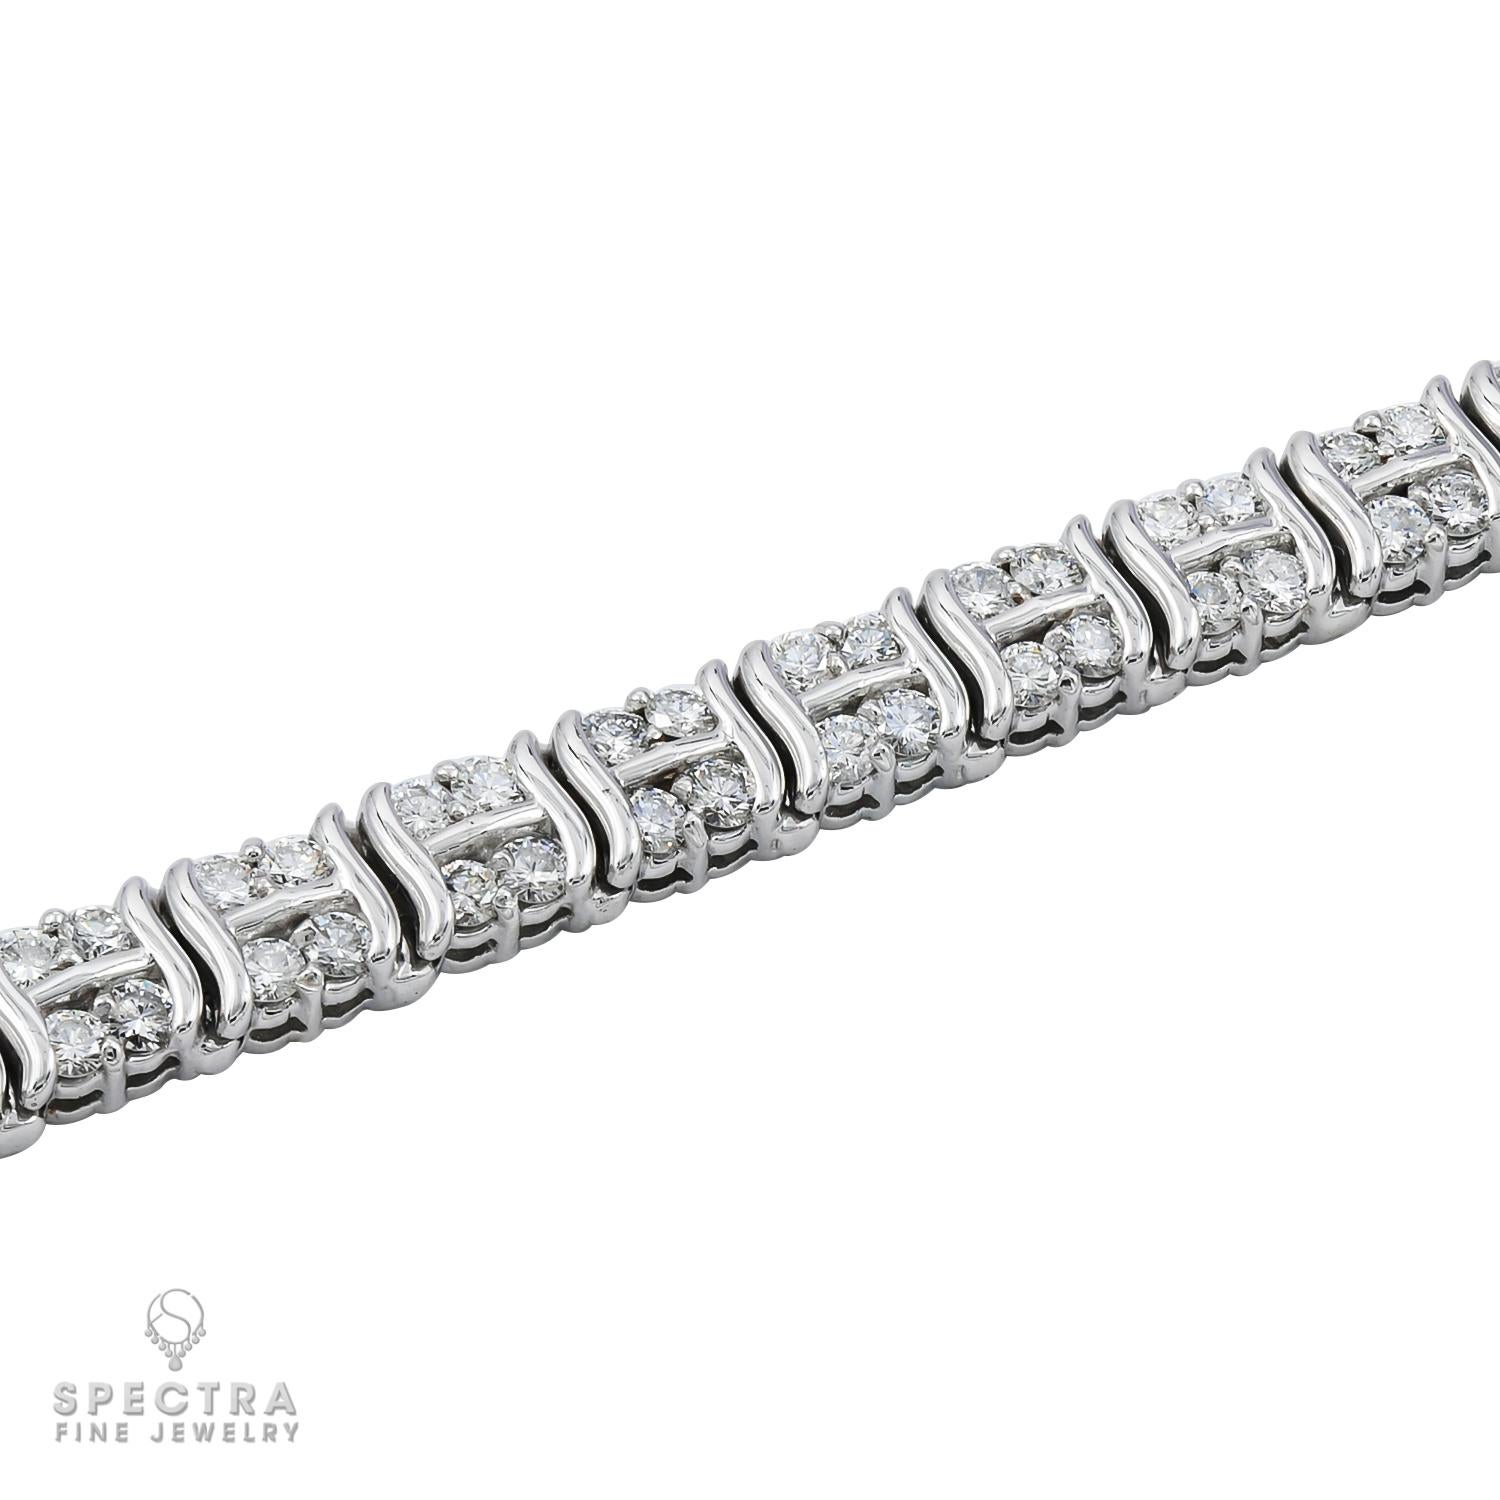 A line bracelet made with diamonds in 14k white gold.
104 round diamonds, weighing a total of 5.2 carats, most with H-I color, VS-SI clarity.
Each diamond is 0.05 carat.
Length is 7 inch.
Gross weight 23.28 gram.